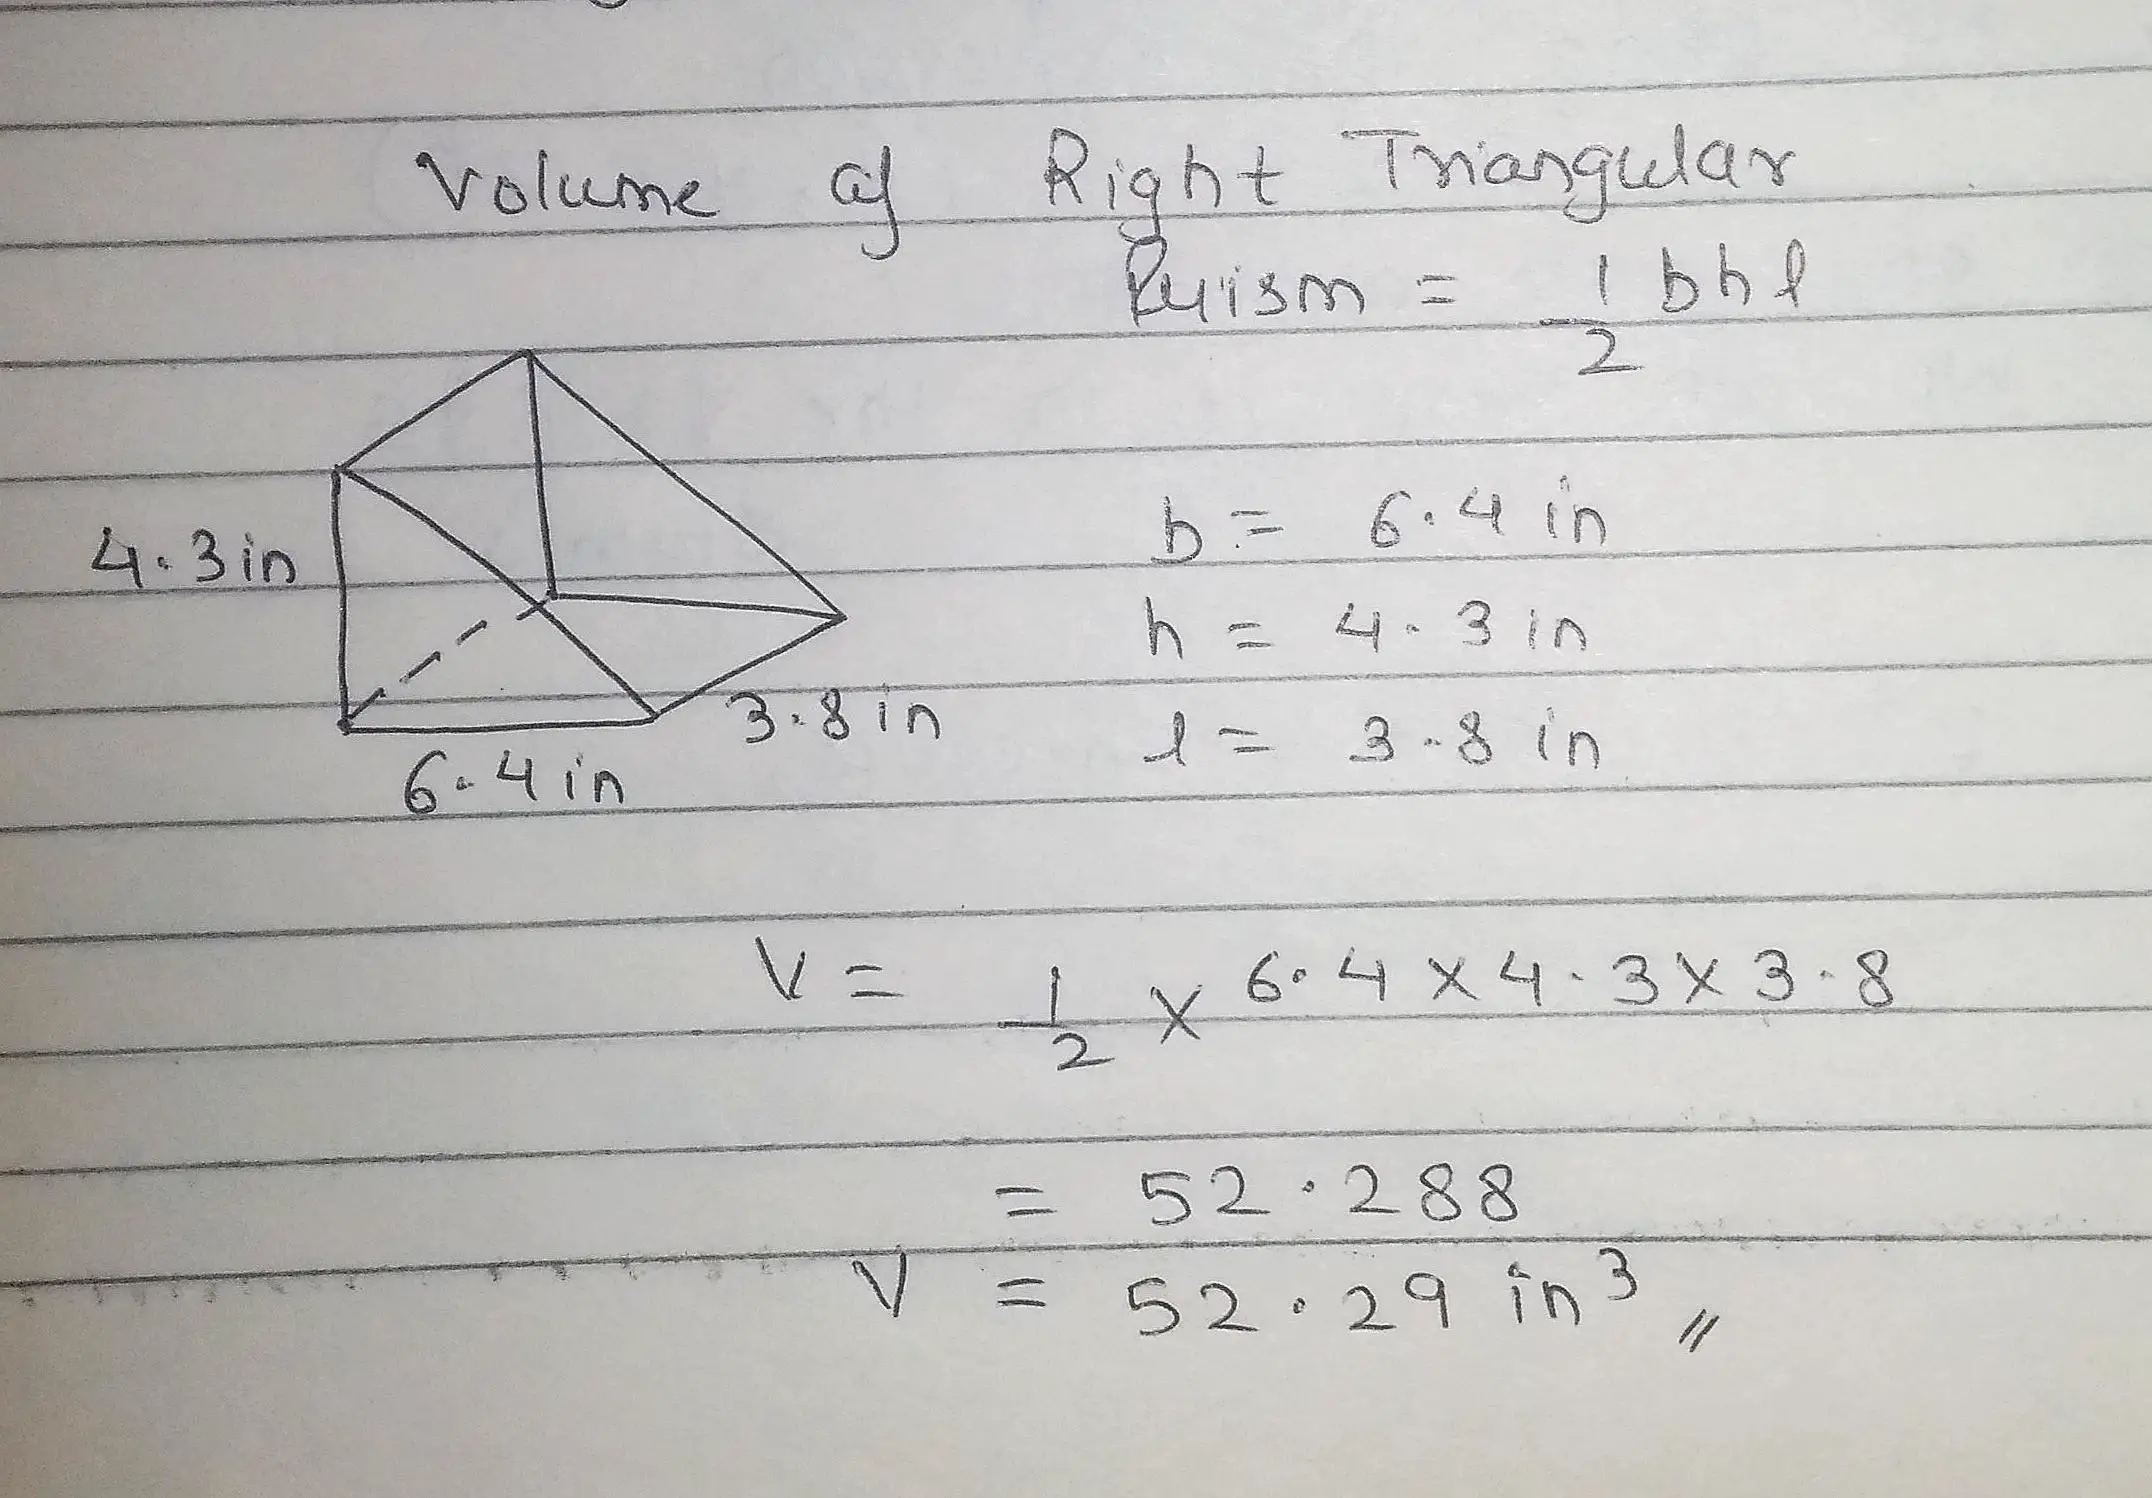 Calculate the volume of this right triangular prism. 4.3 in. 3.8 in. 6.4 in. a. 62.09 in. b. 104.58 in. c. 92.41 in. d. 52.29 in.